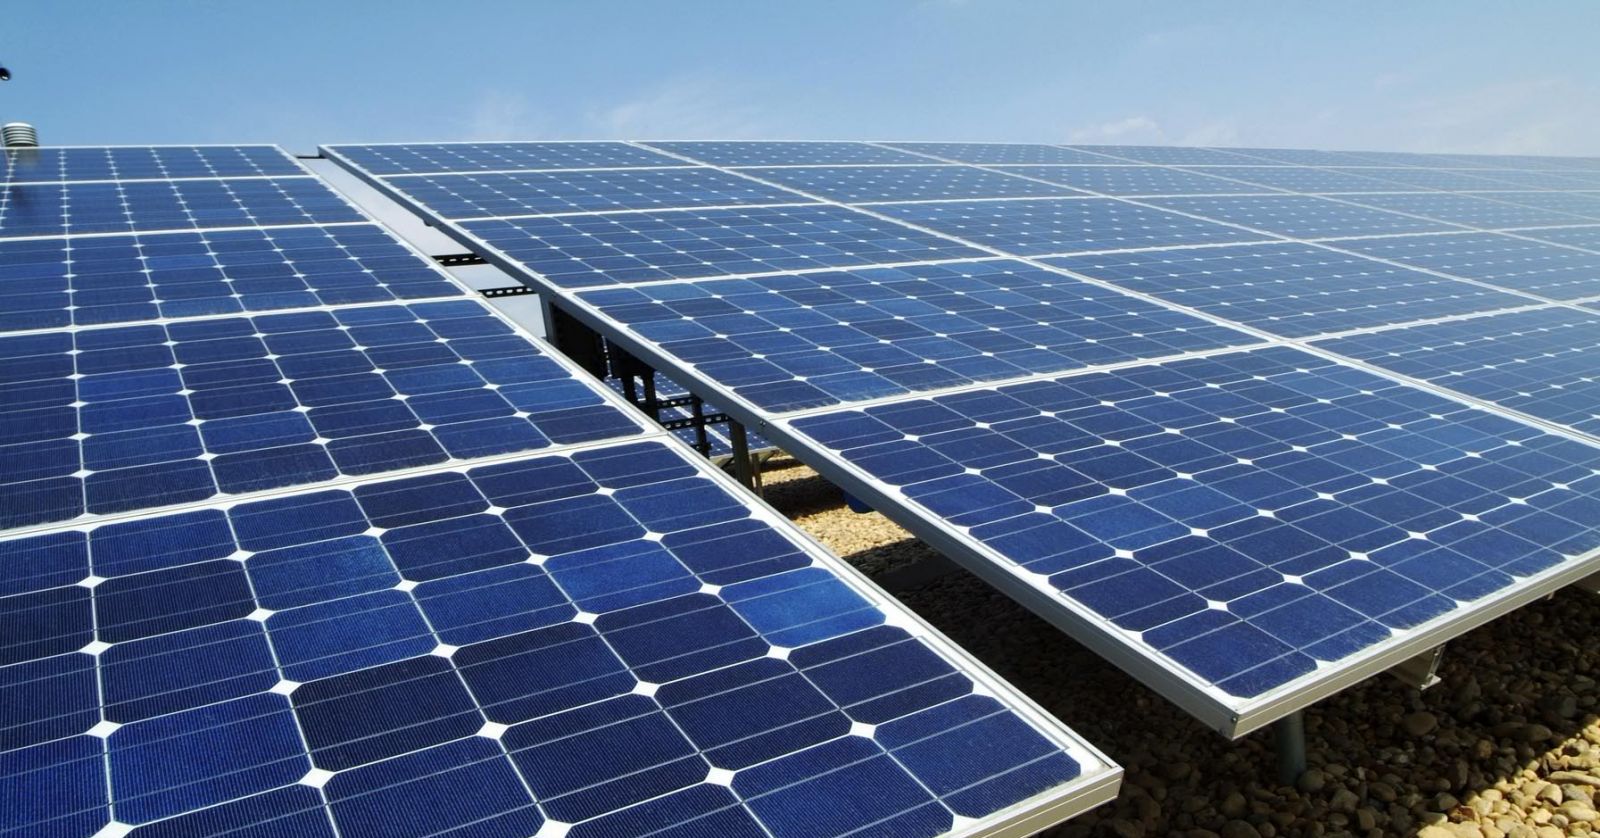 Why is the US considering temporary tax exemption for solar panels imported from Vietnam?